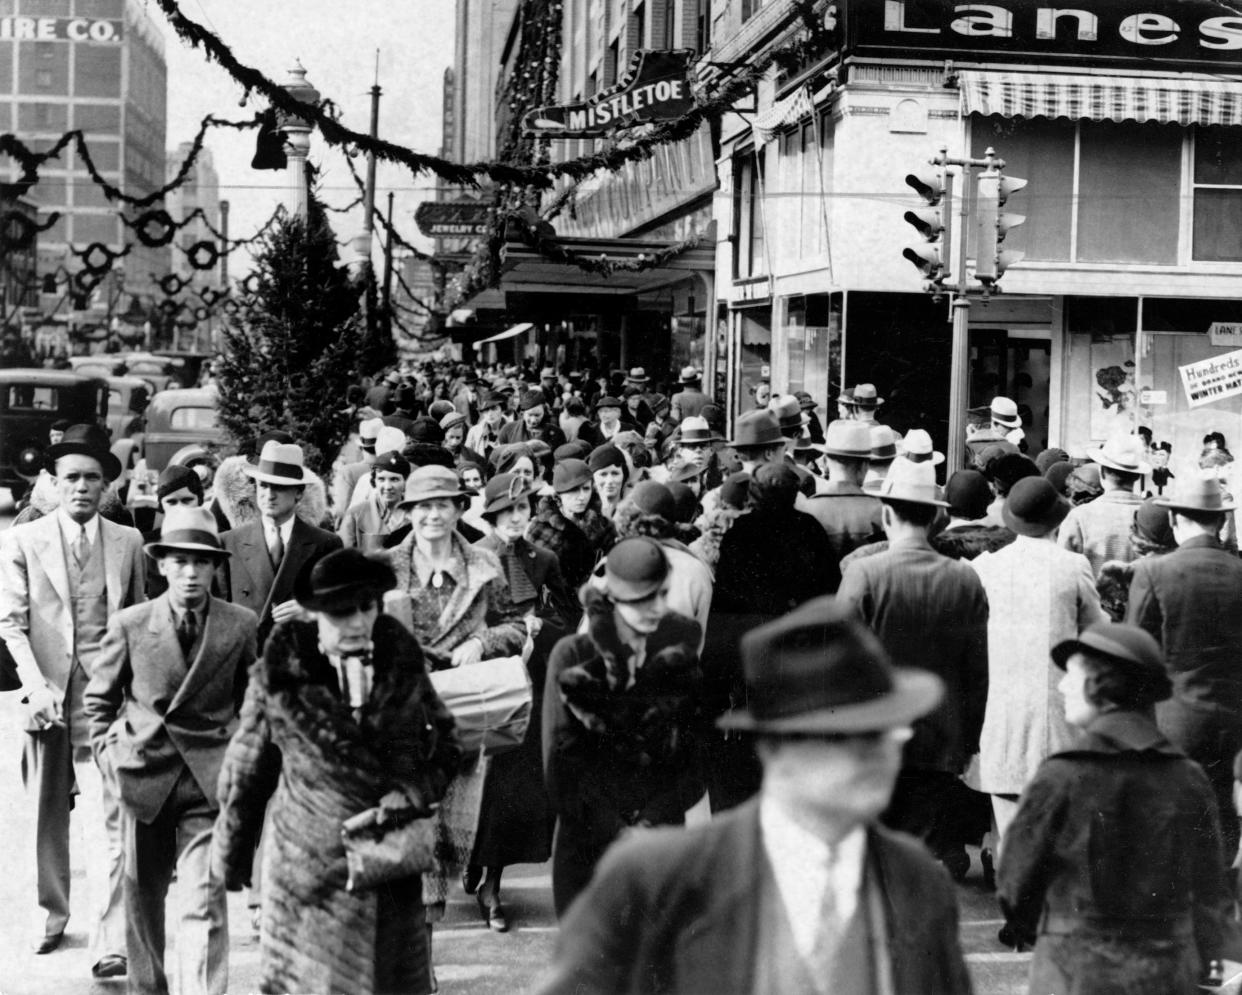 Downtown Oklahoma City merchants reported a 26% increase in Christmas season sales in 1934 compared to the previous year. This photo shows the crowd of shoppers packing sidewalks, bustling about.